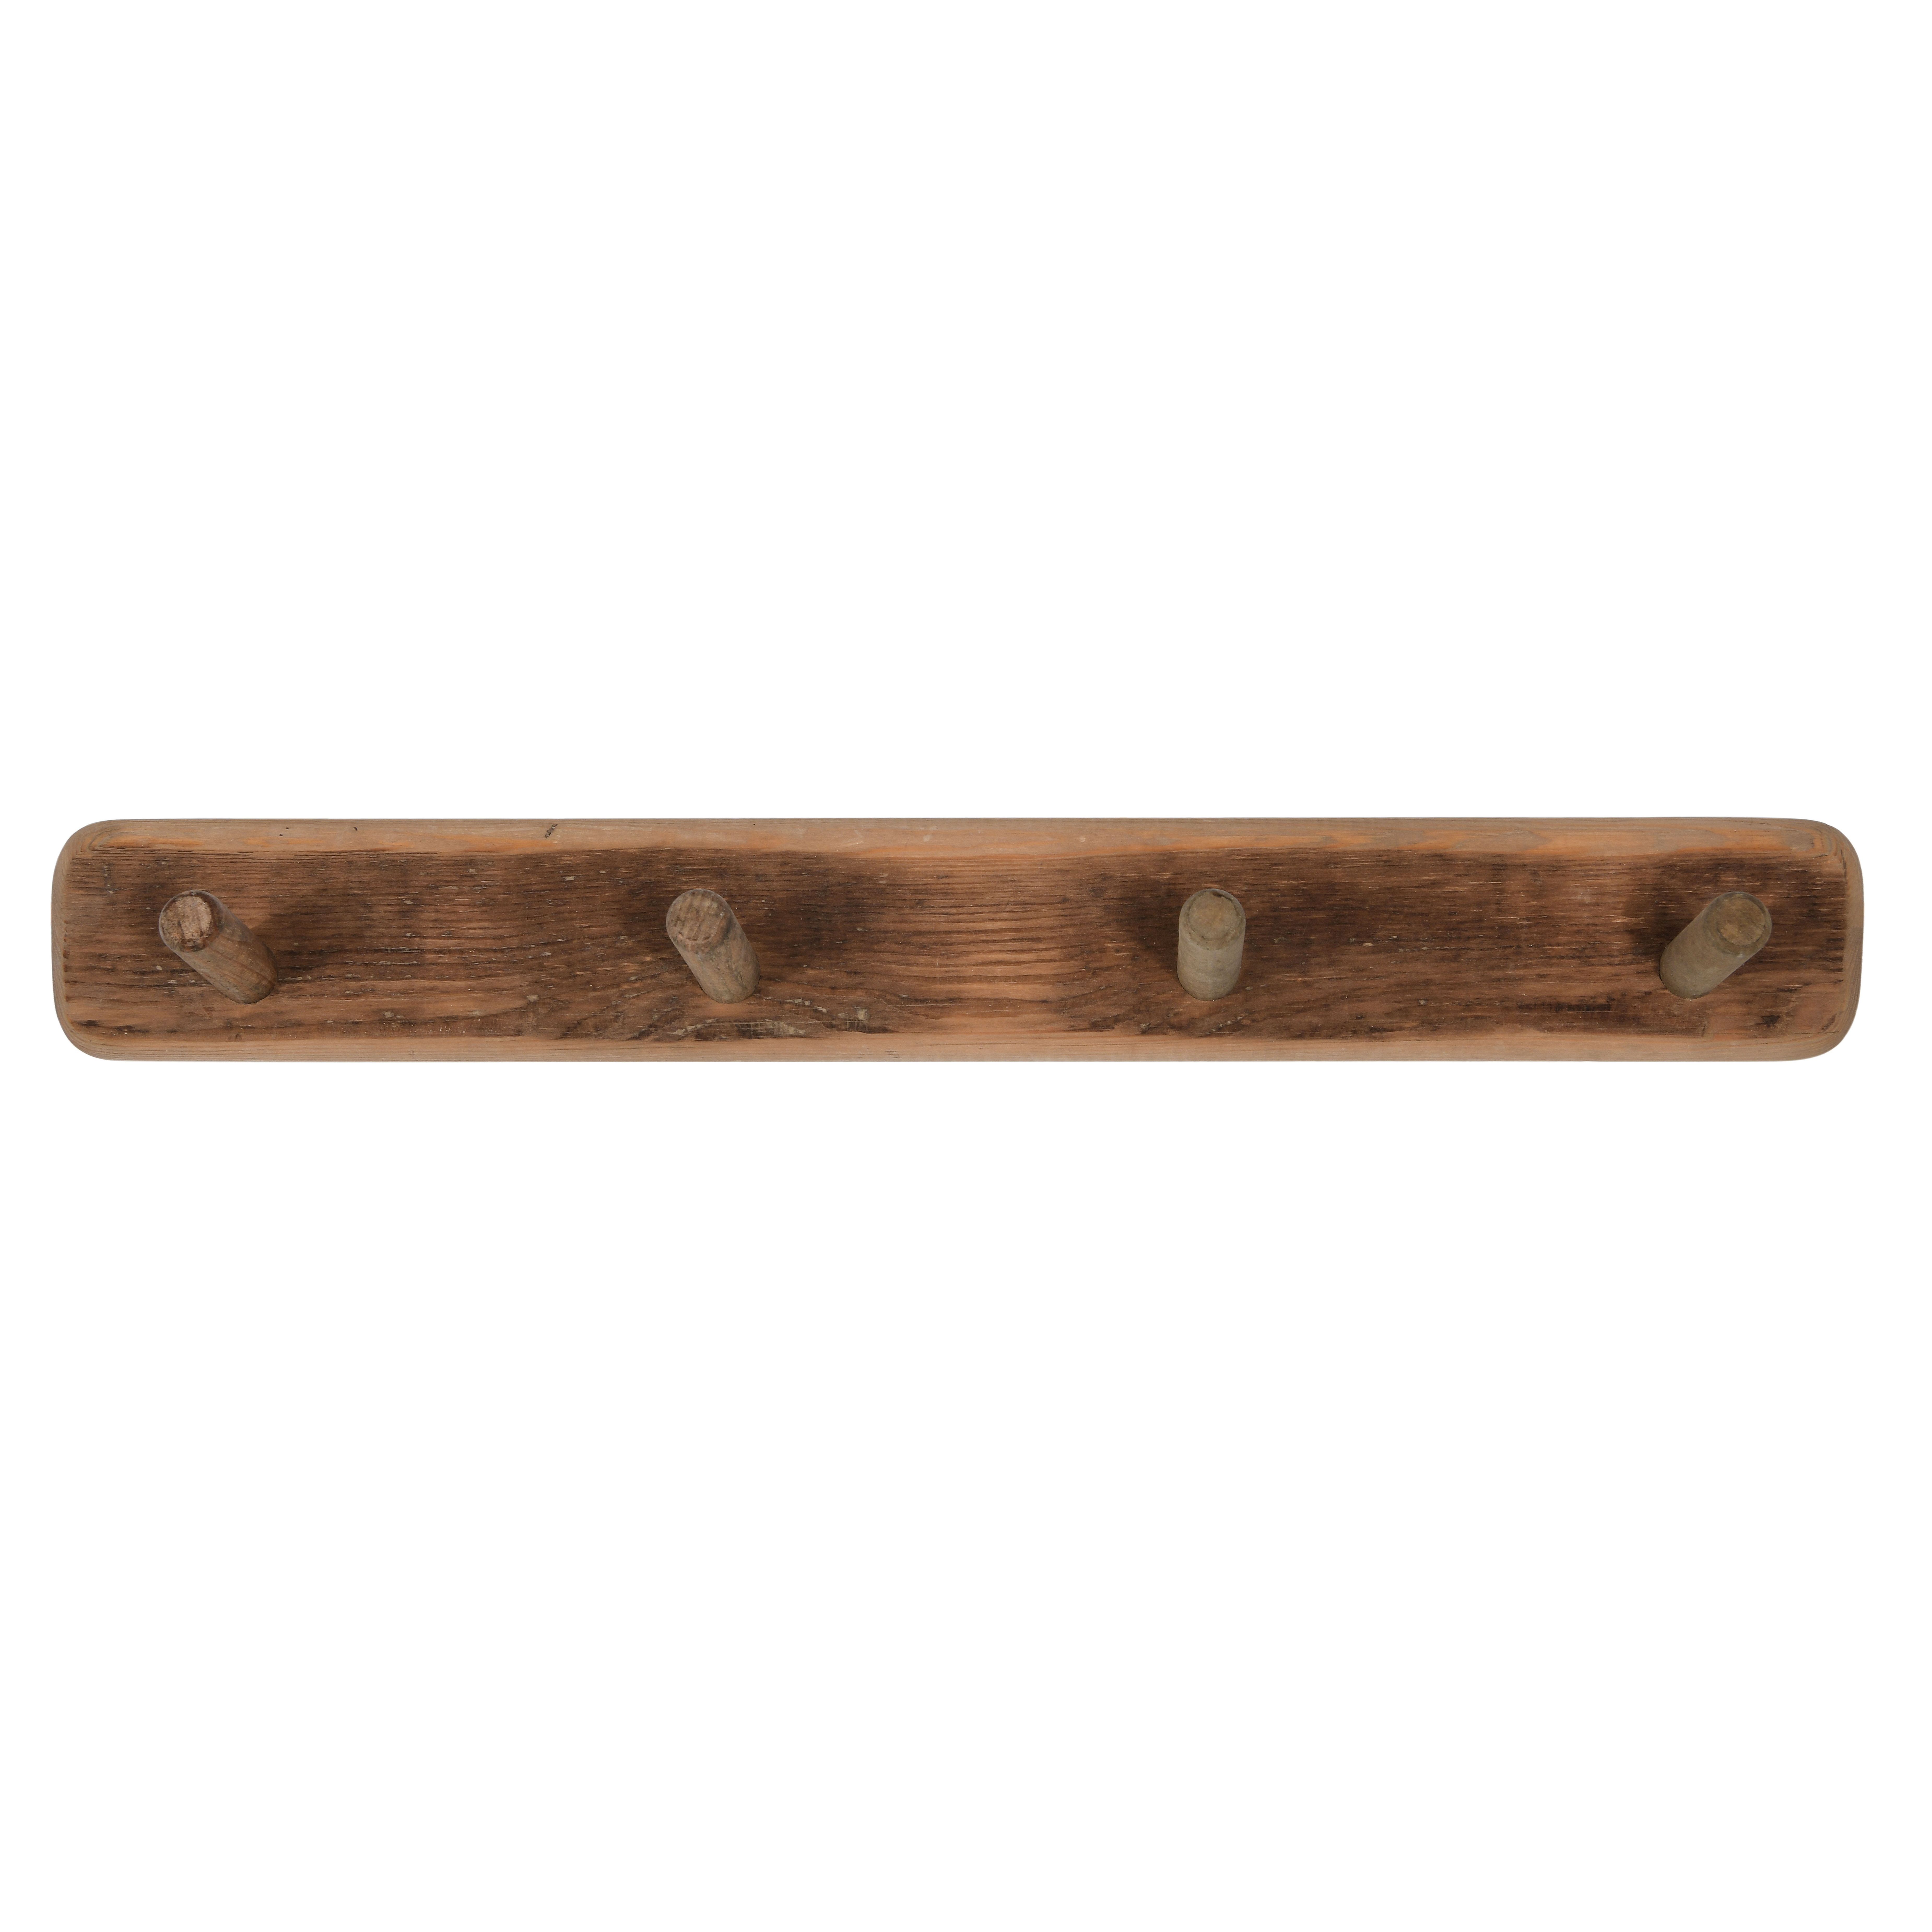 Reclaimed Wood Wall Hook with 4 Hooks - Nomad Home